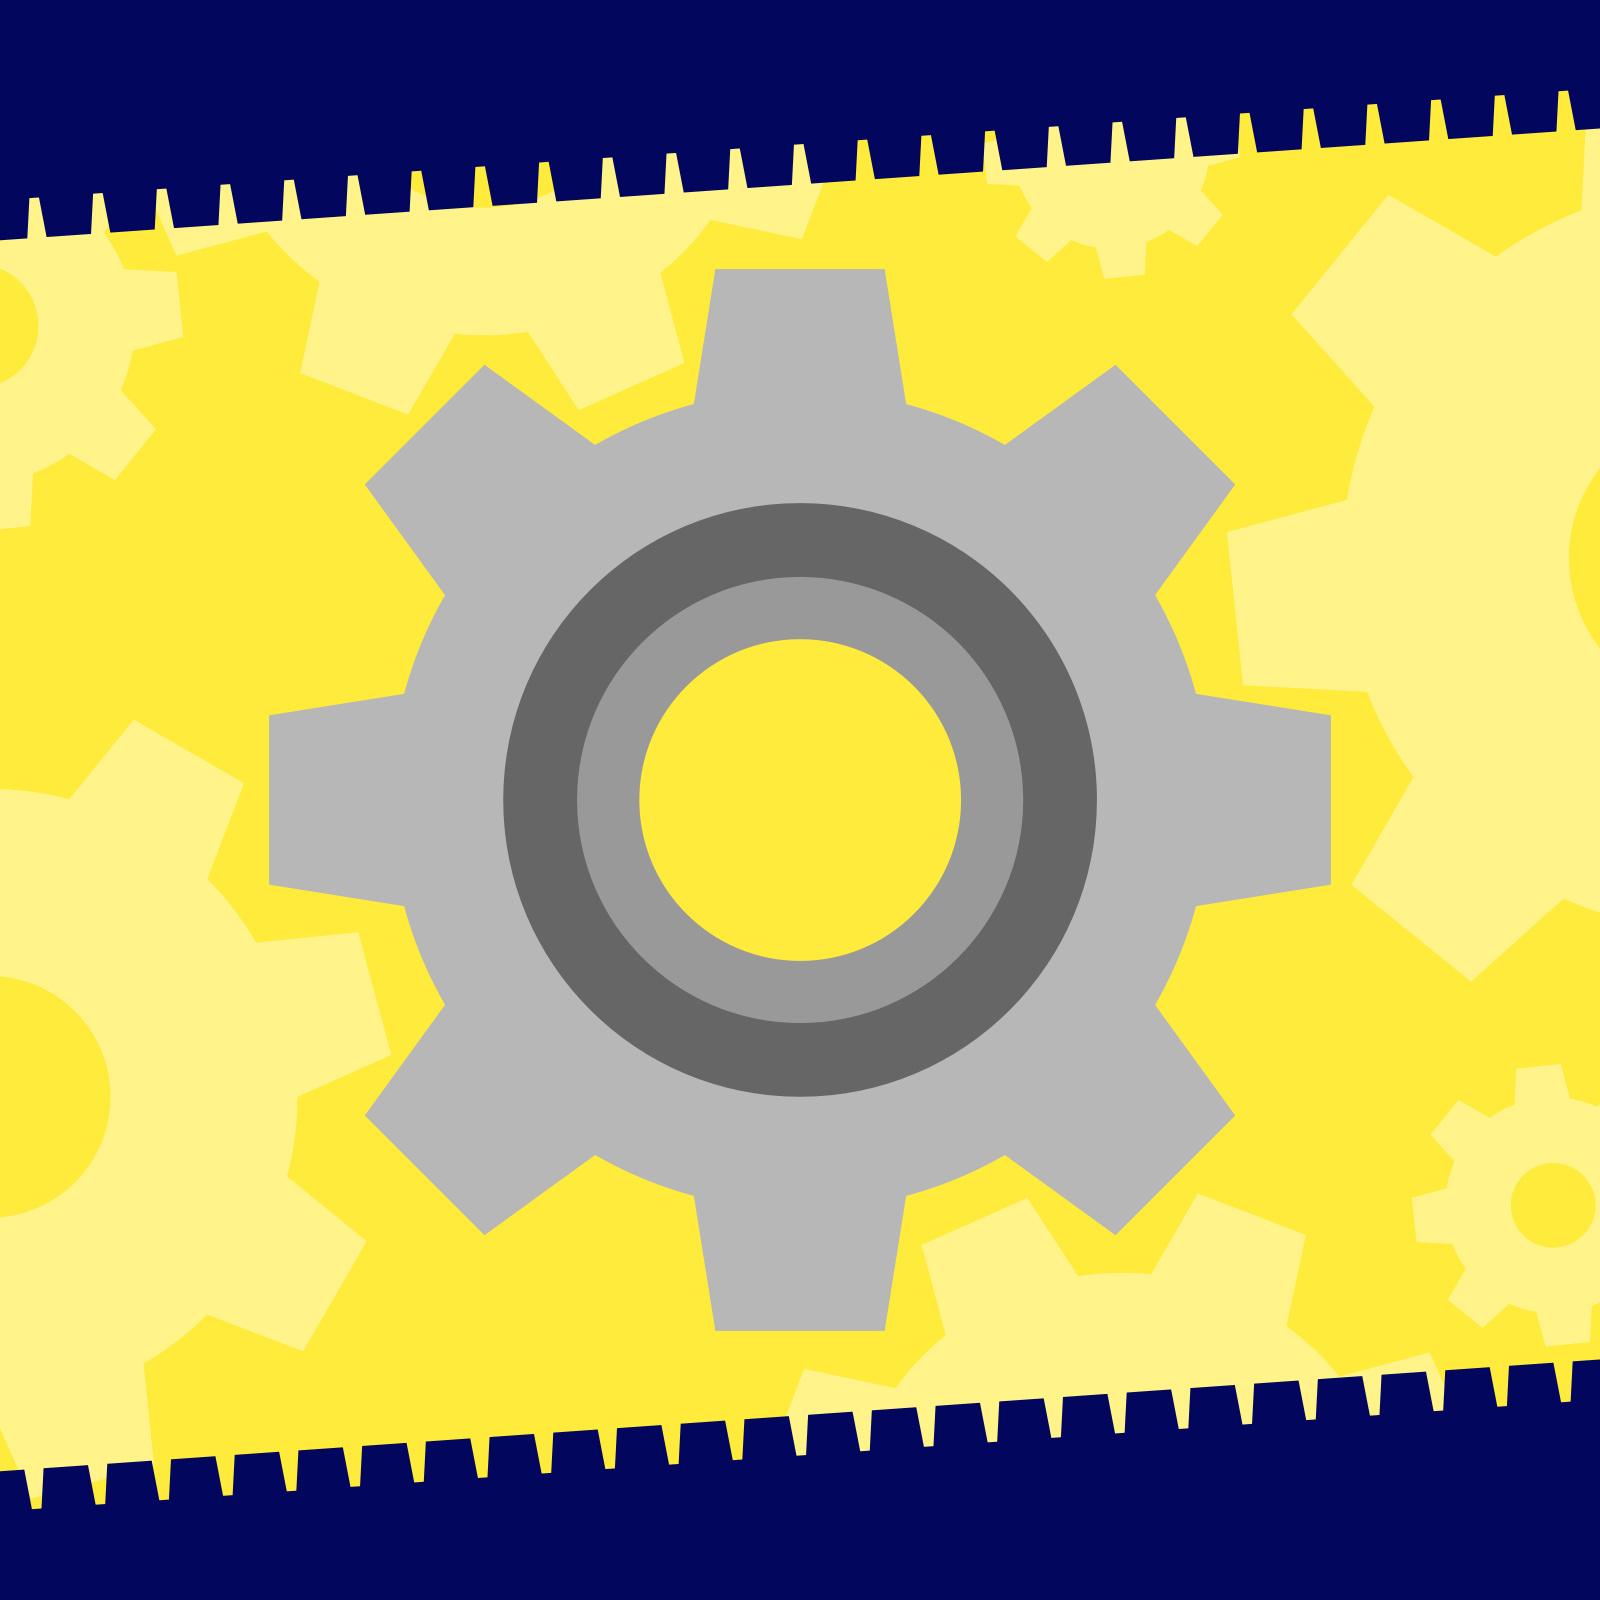 Drawing of a gear